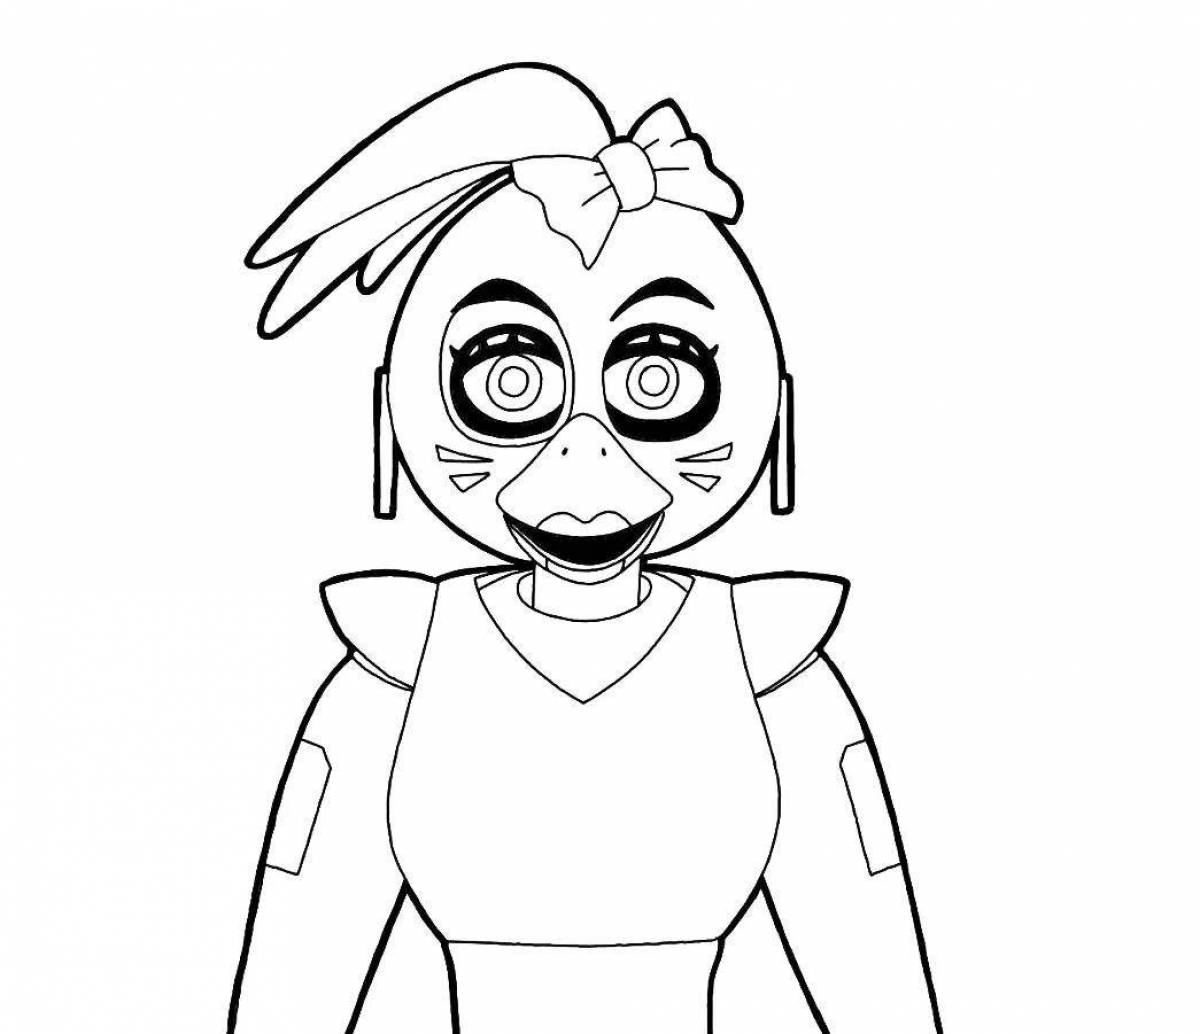 Coloring book outstanding chica from fnaf 1